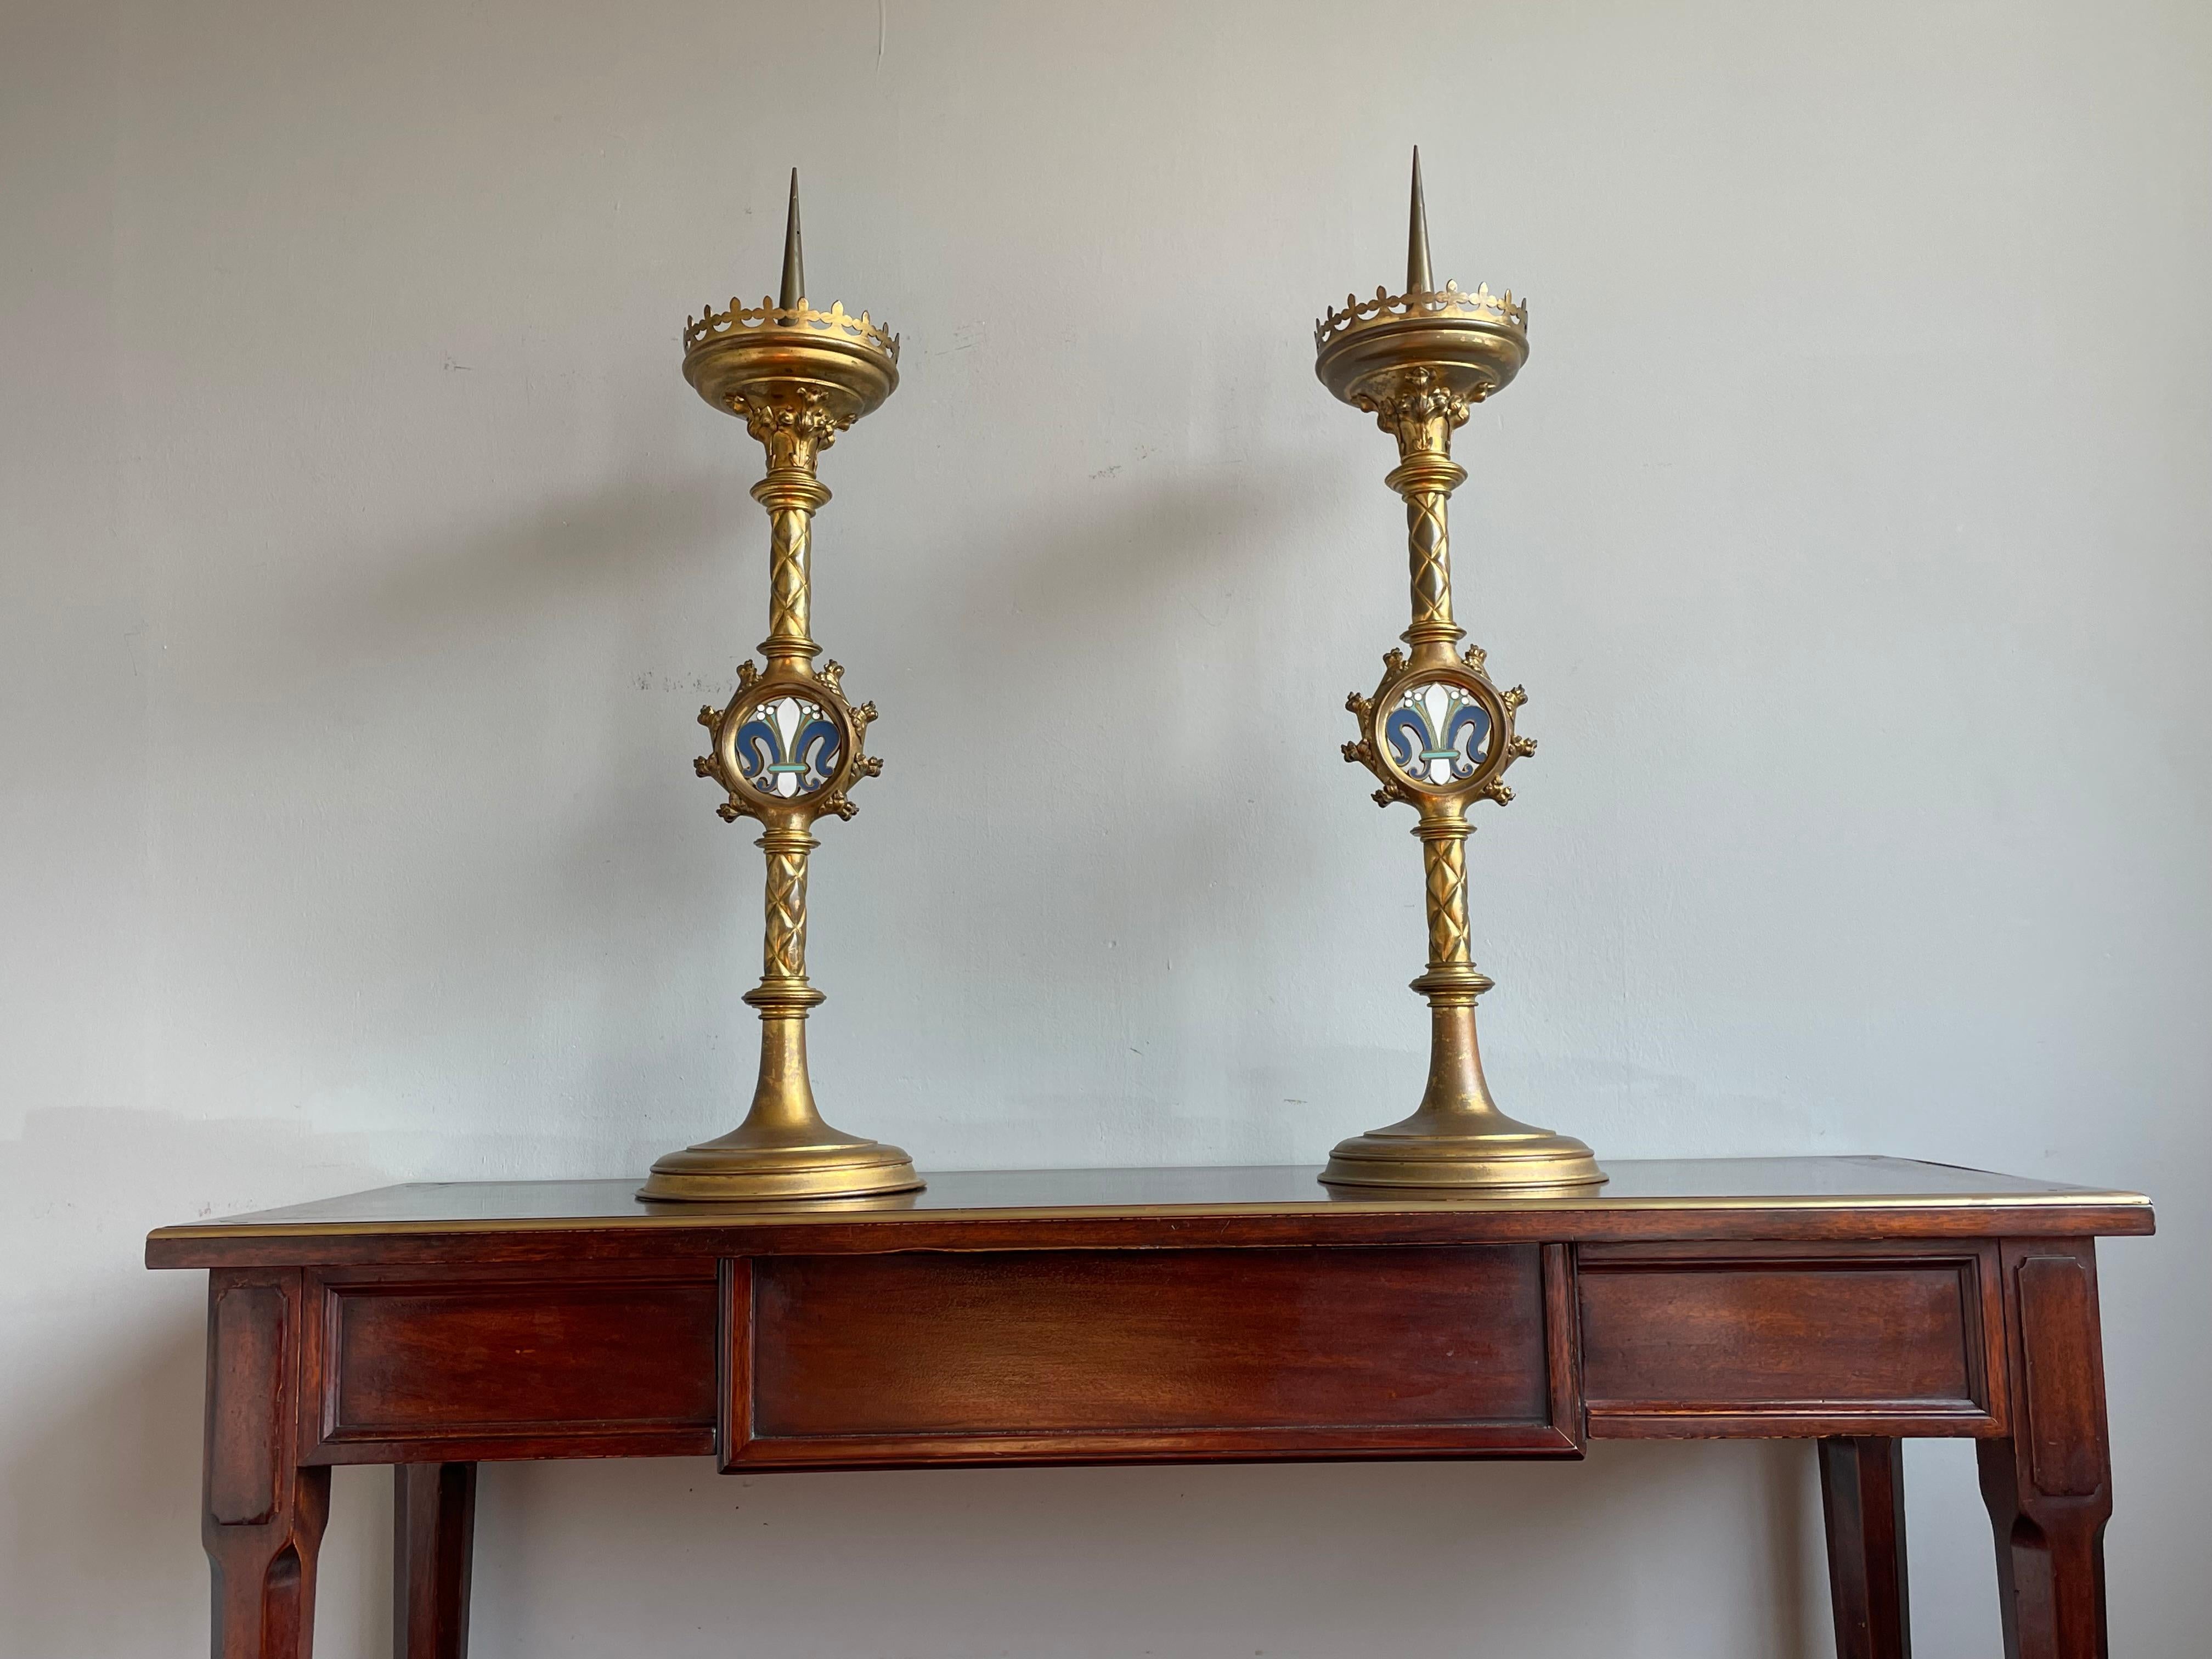 Stunning pair of late 19th or early 20th century, Gothic church candle holders.

If you are looking for a stylish and good size pair of church candleholders to create a special atmosphere then this handcrafted and gilt pair could be perfect for you.